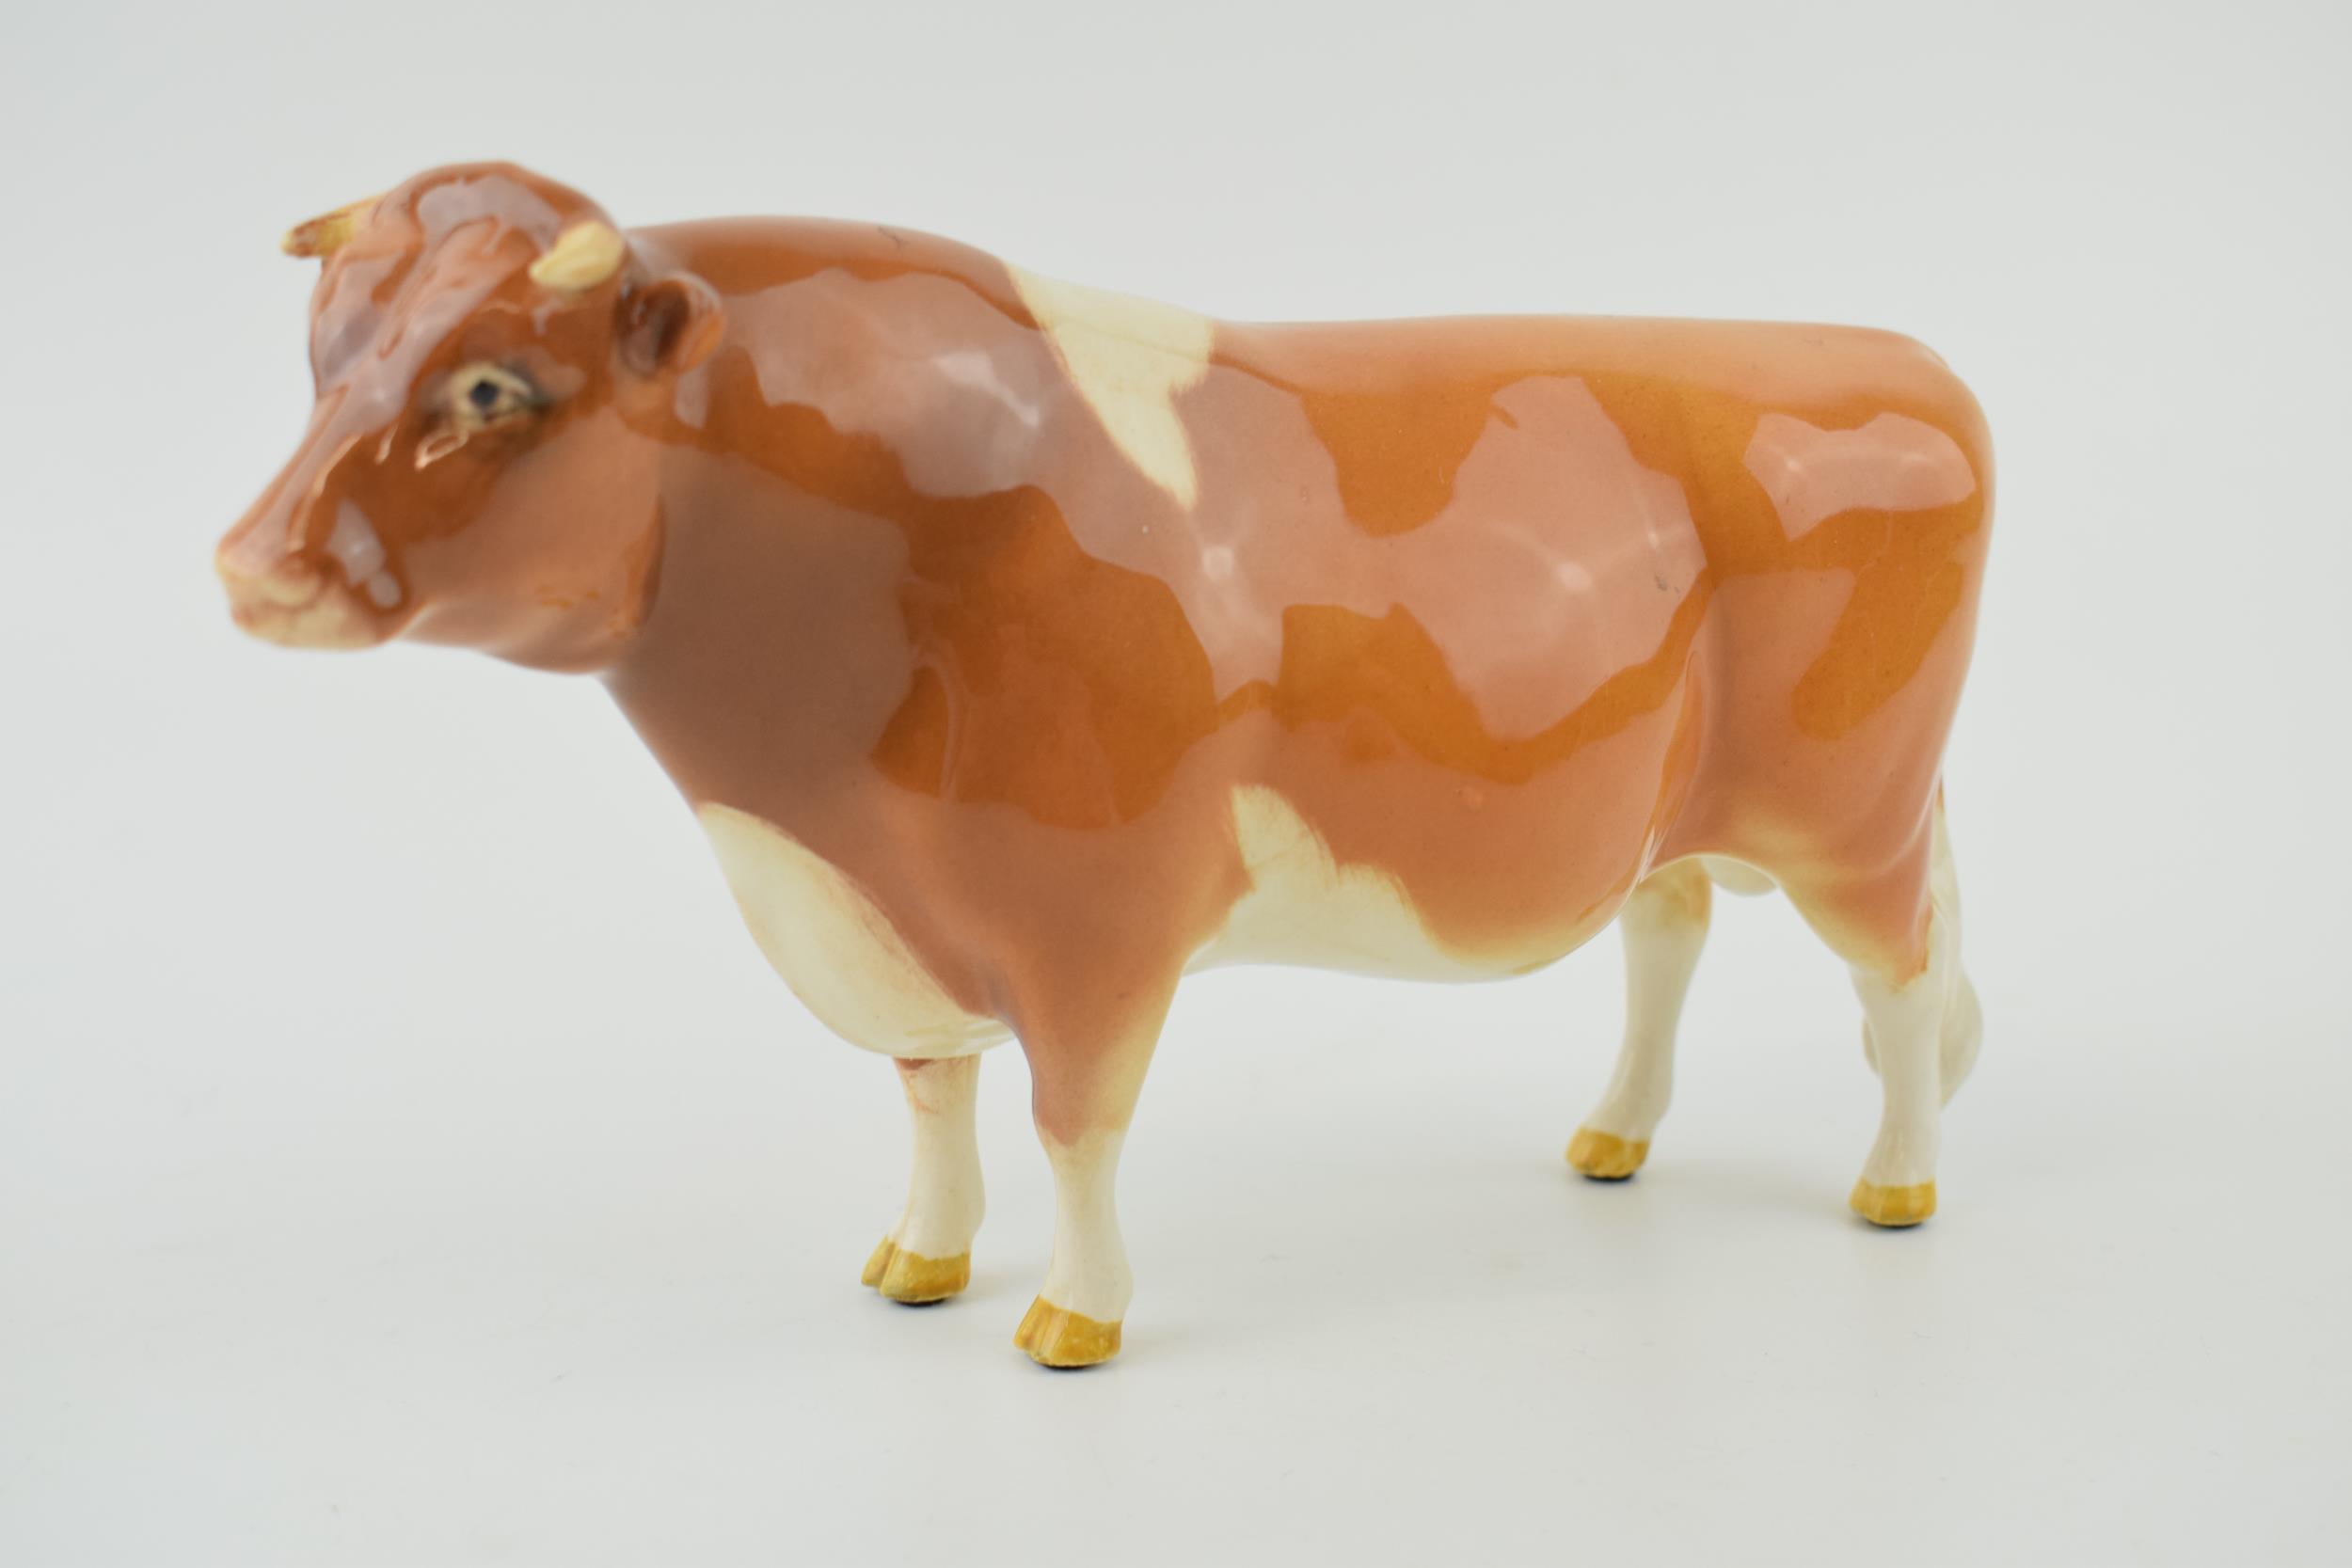 Beswick Guernsey Bull. In good condition with no obvious damage or restoration.